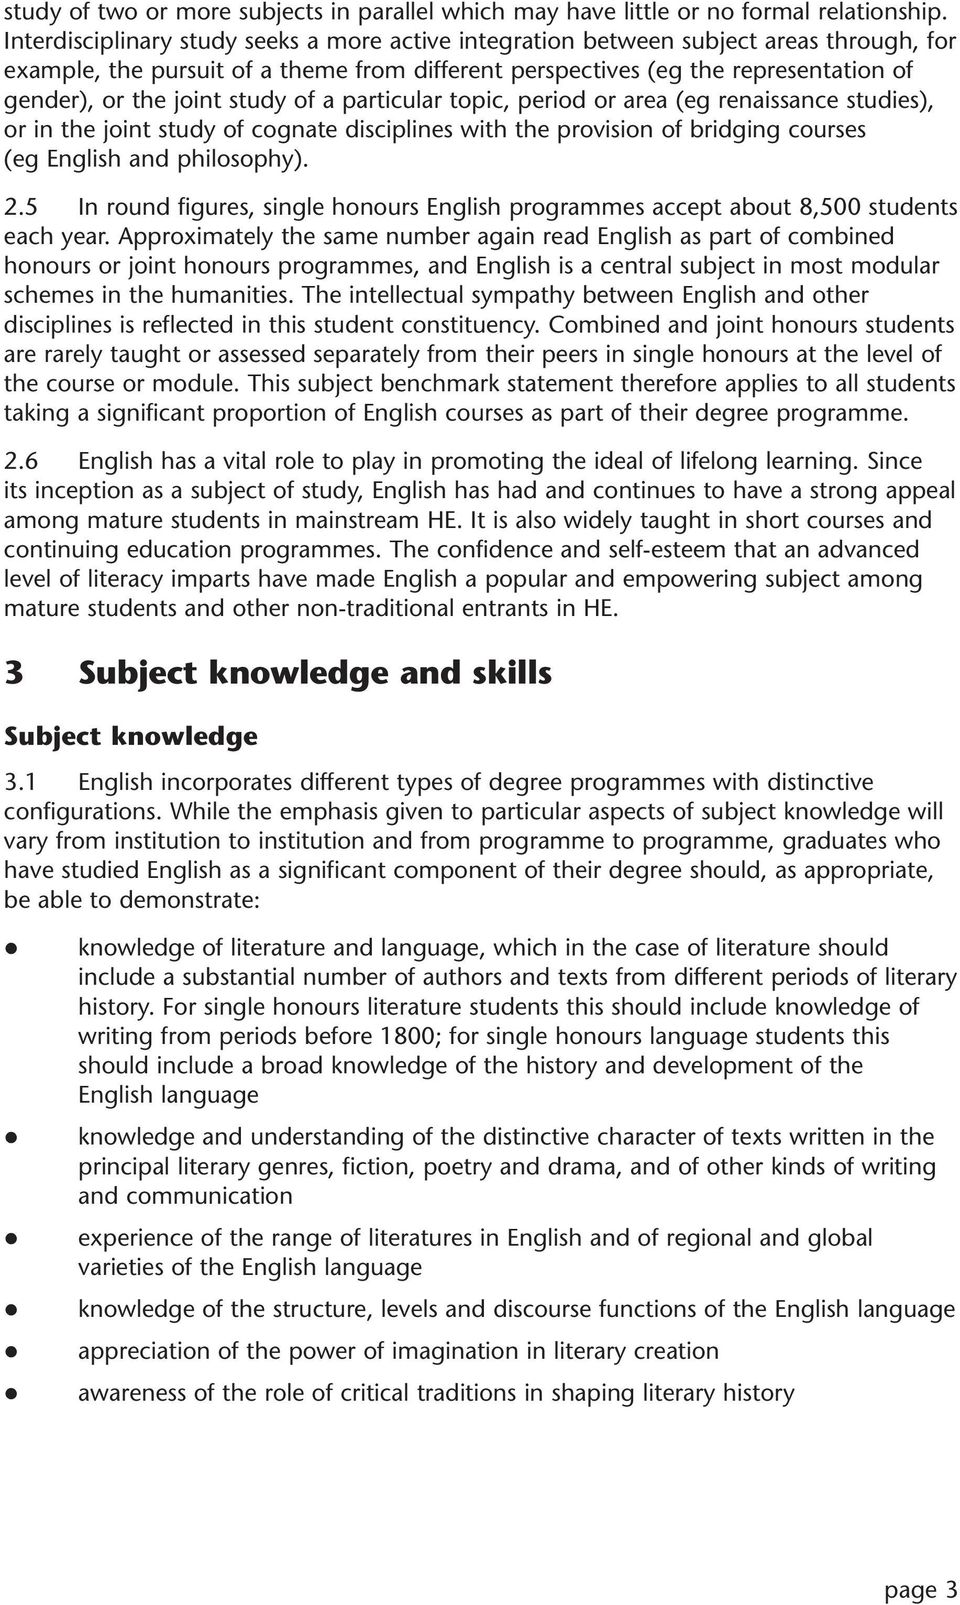 study of a particular topic, period or area (eg renaissance studies), or in the joint study of cognate disciplines with the provision of bridging courses (eg English and philosophy). 2.